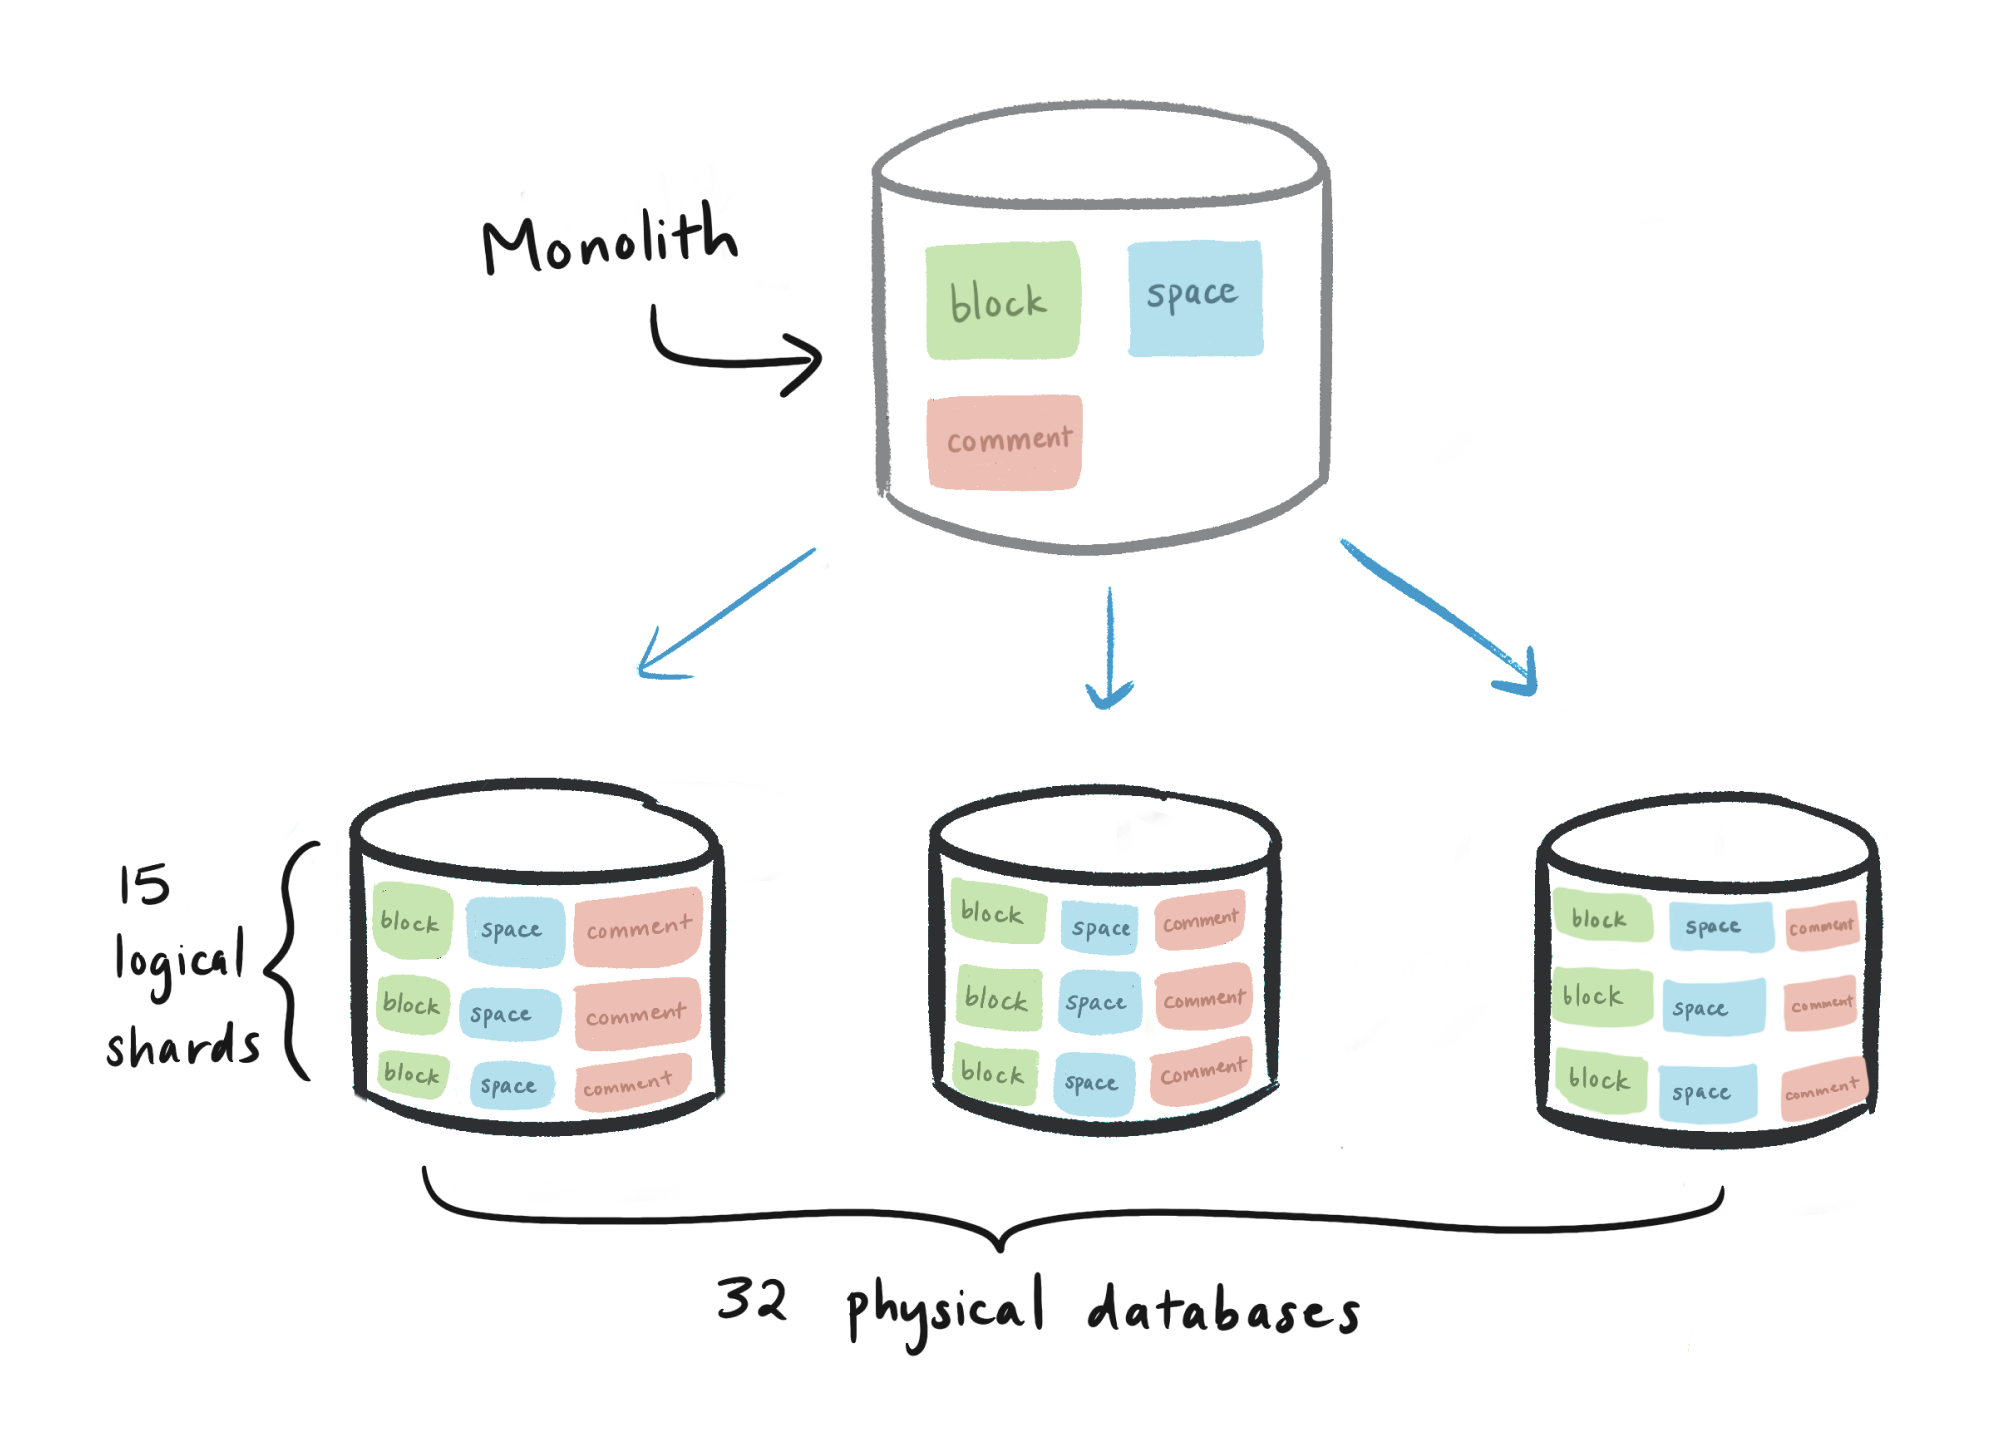 A hand-drawn diagram depicts one cylindrical database, labeled "Monolith", containing colored tables block, space, and comment. Below the monolith, arrows point to three smaller databases, each containing three rows of block, space, and comment tables. The smaller databases are labeled to indicate that there are 32 physical databases in total, with each database containing 15 logical shards.